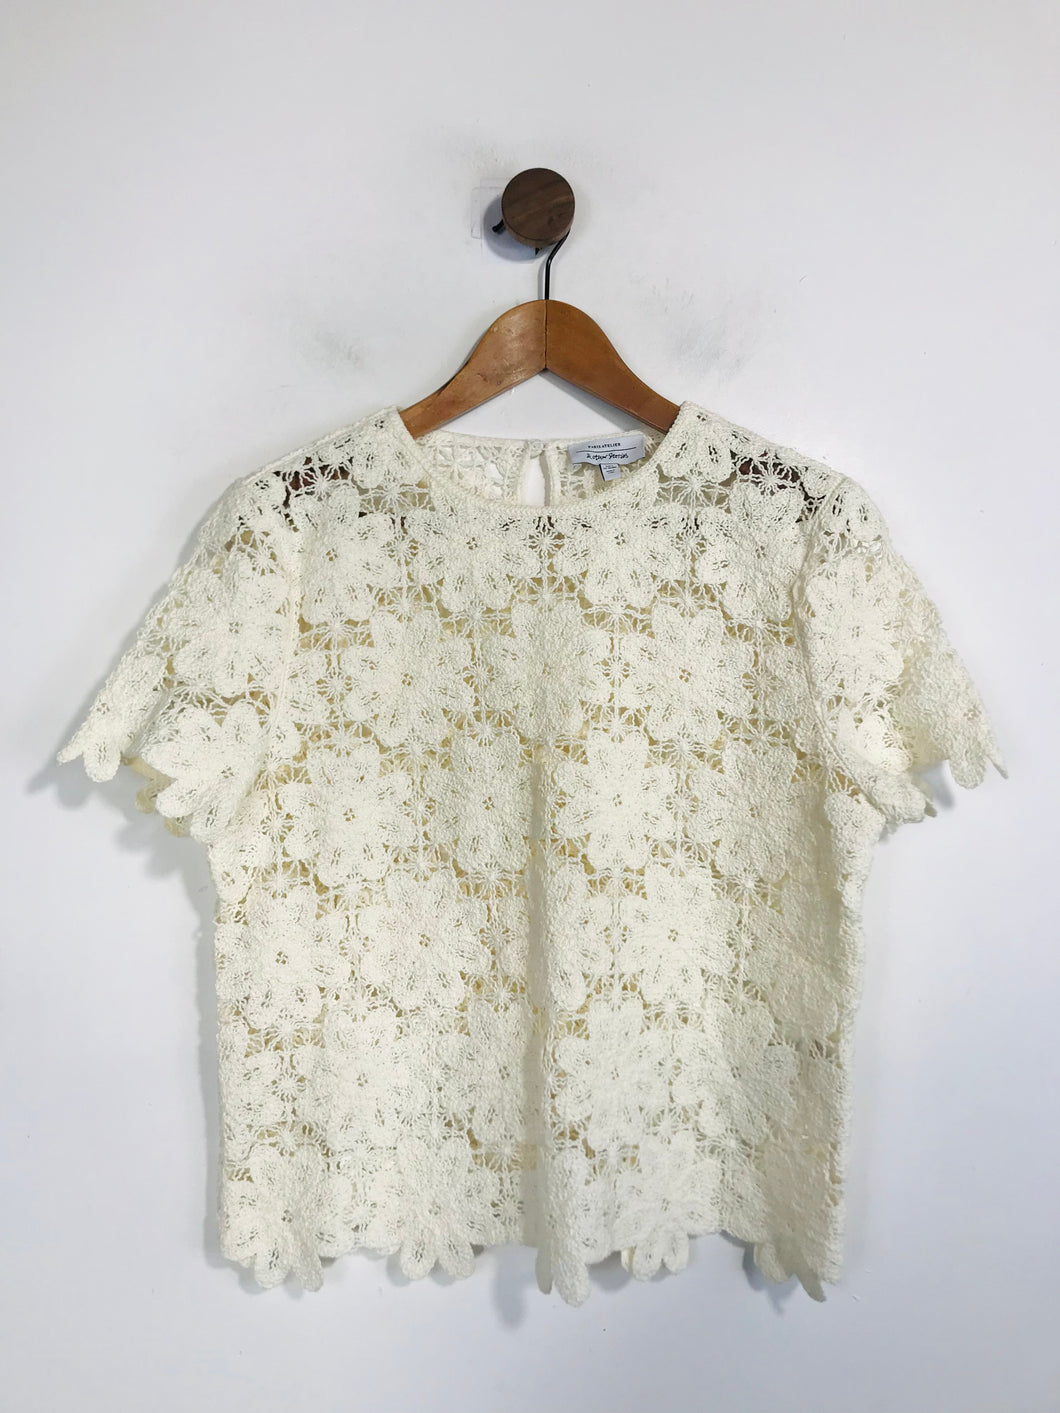 & Other Stories Women's Crochet Lace T-Shirt | S UK8 | White